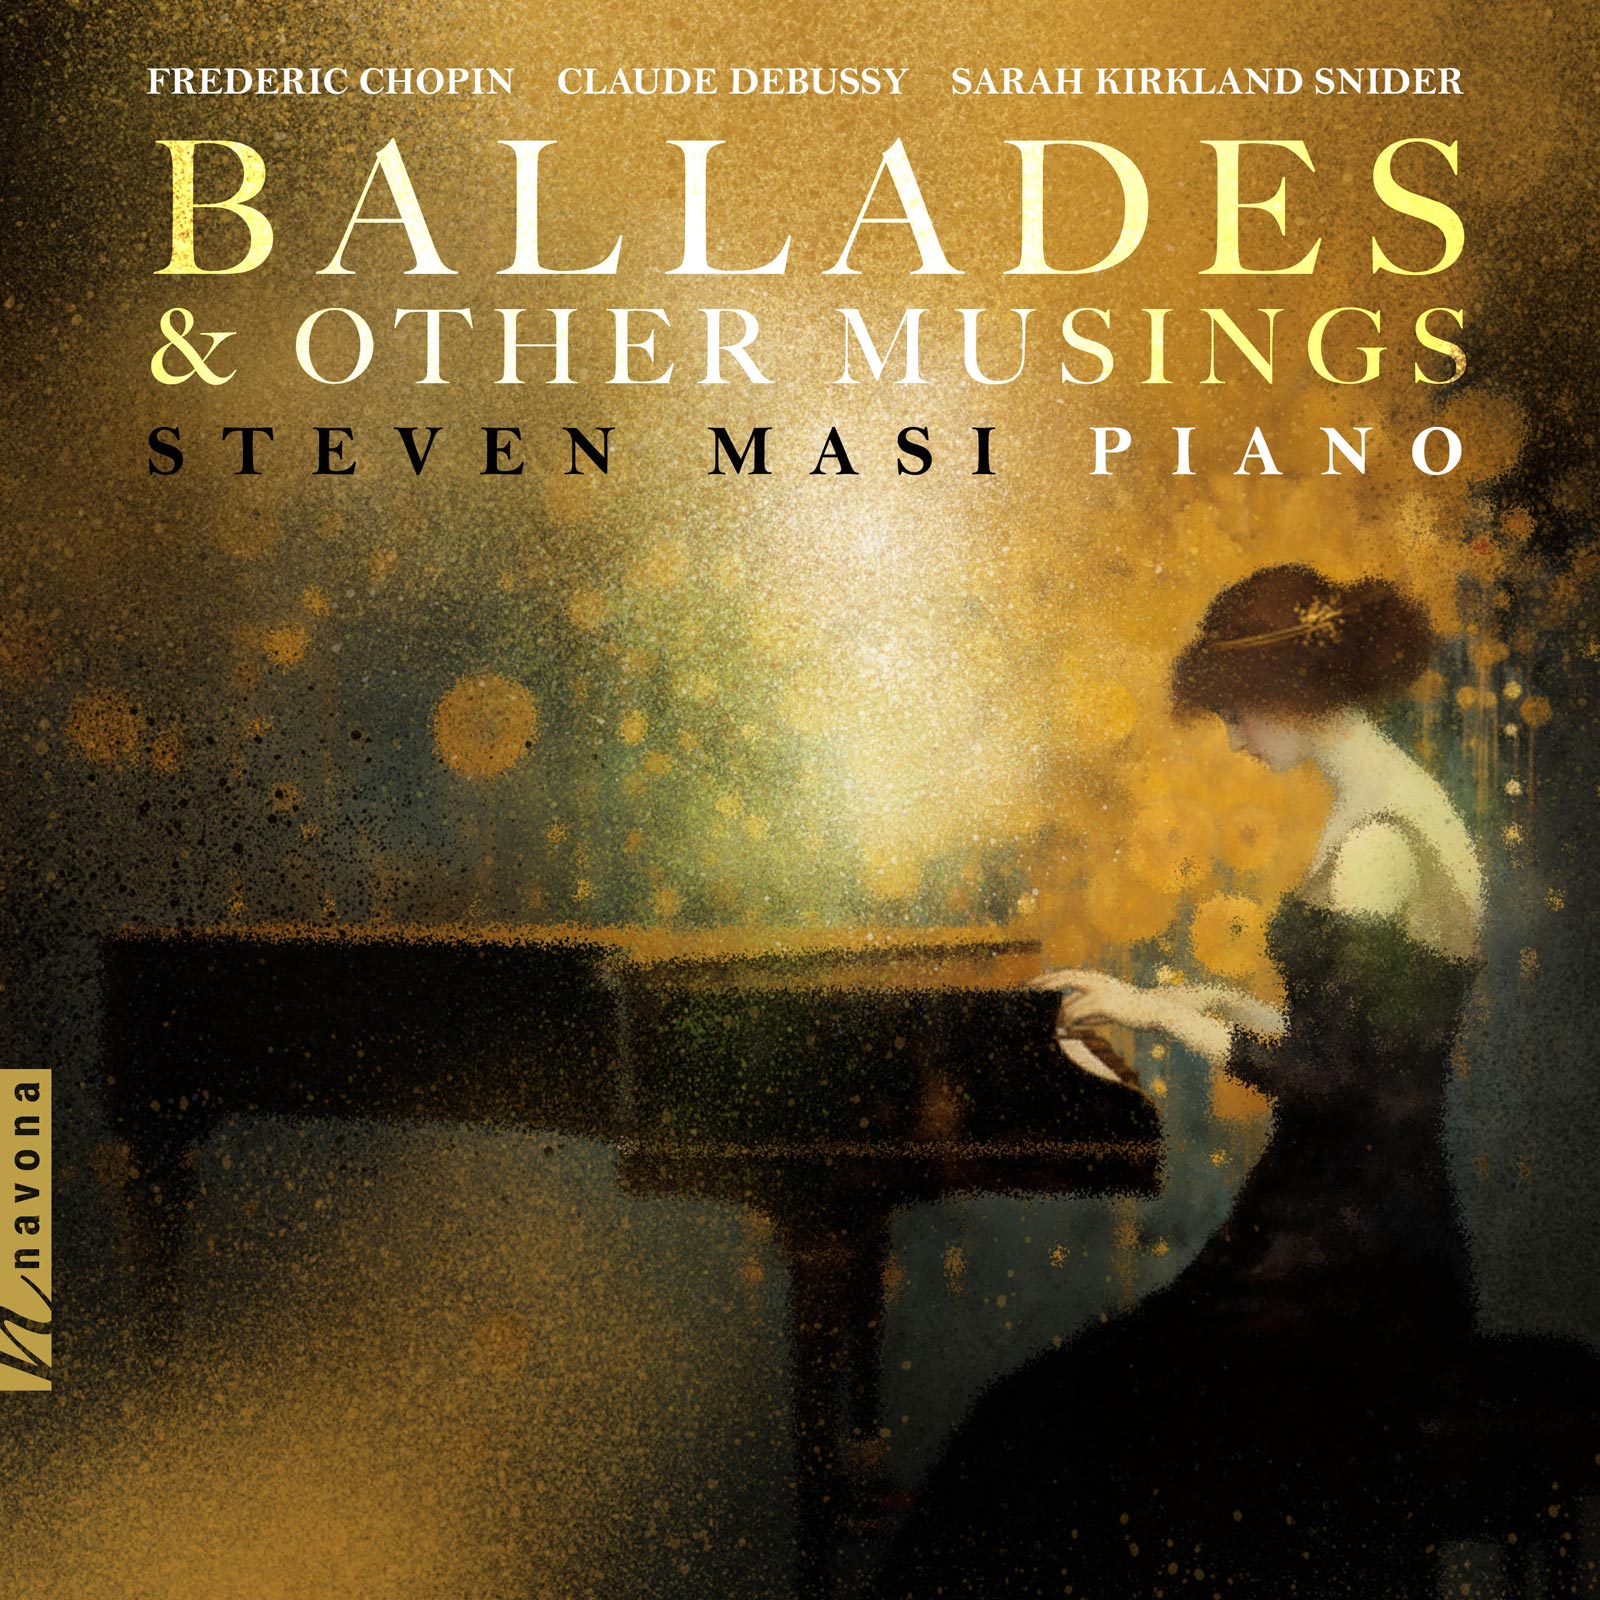 BALLADES AND OTHER MUSINGS